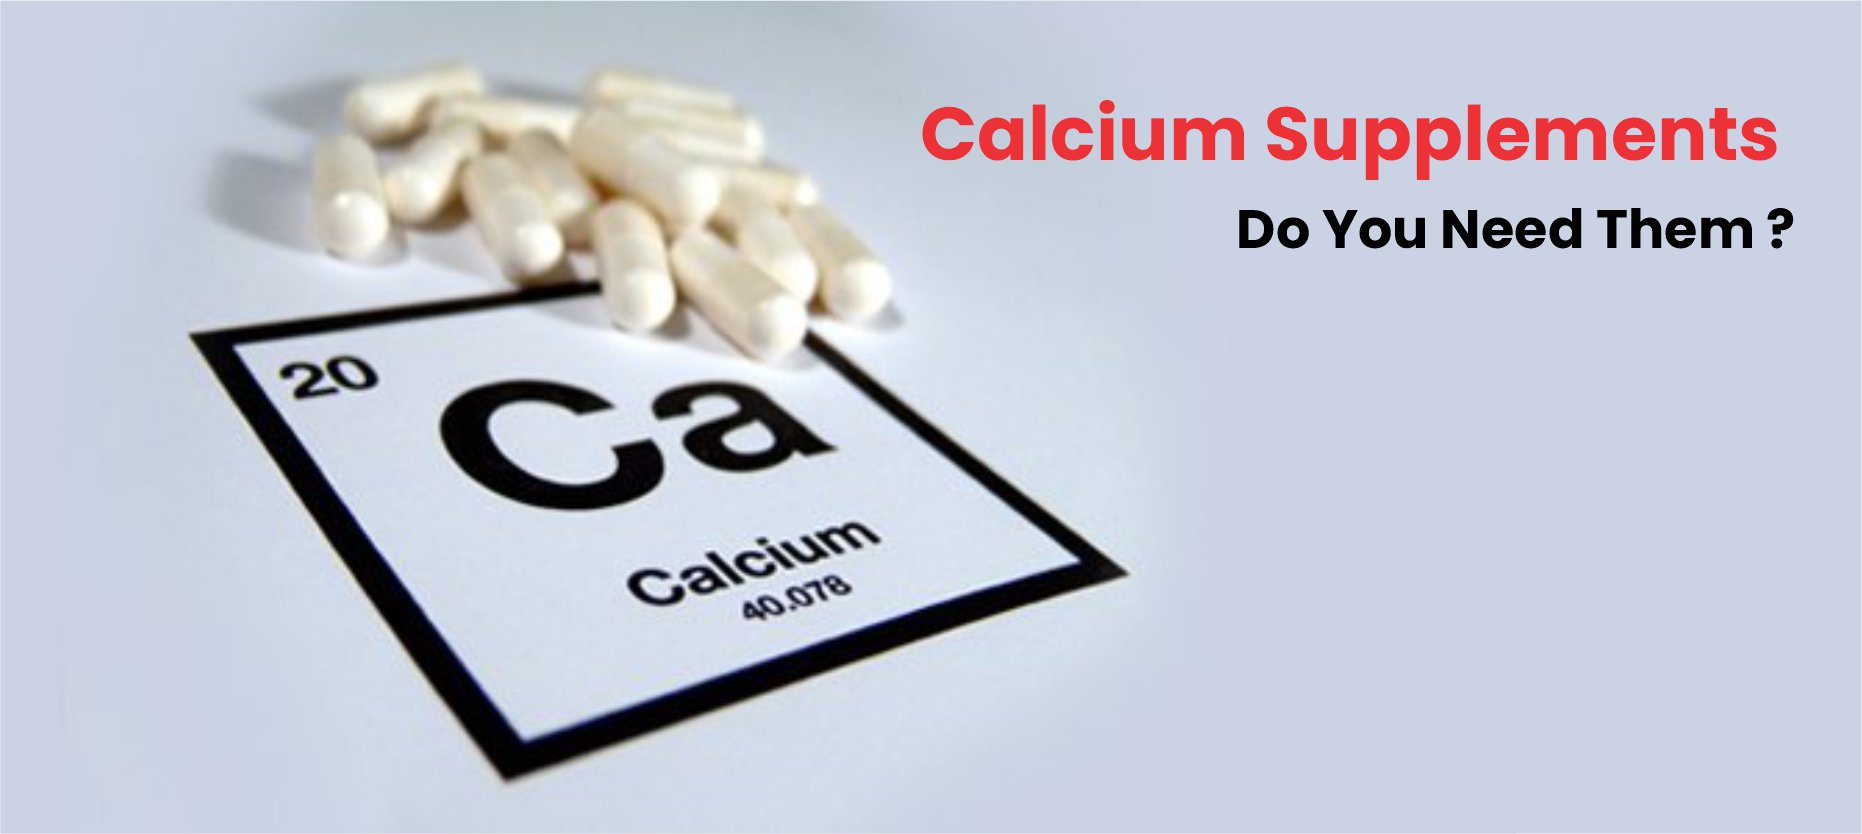 Calcium Supplements – Who needs them?